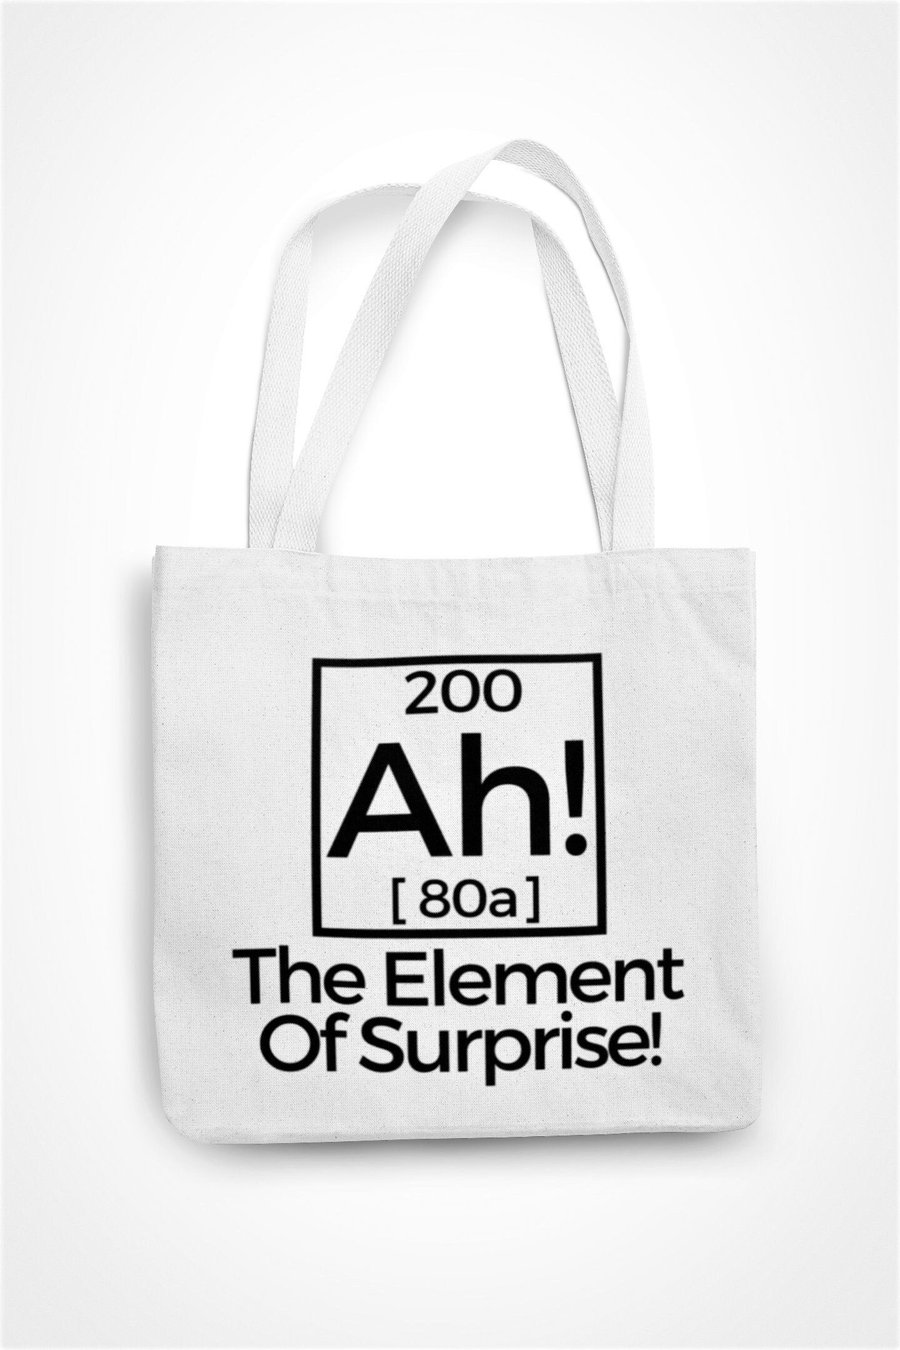 Ah! The Element Of Surprise Tote Bag Funny Geek Humour Scientist Periodic Table 